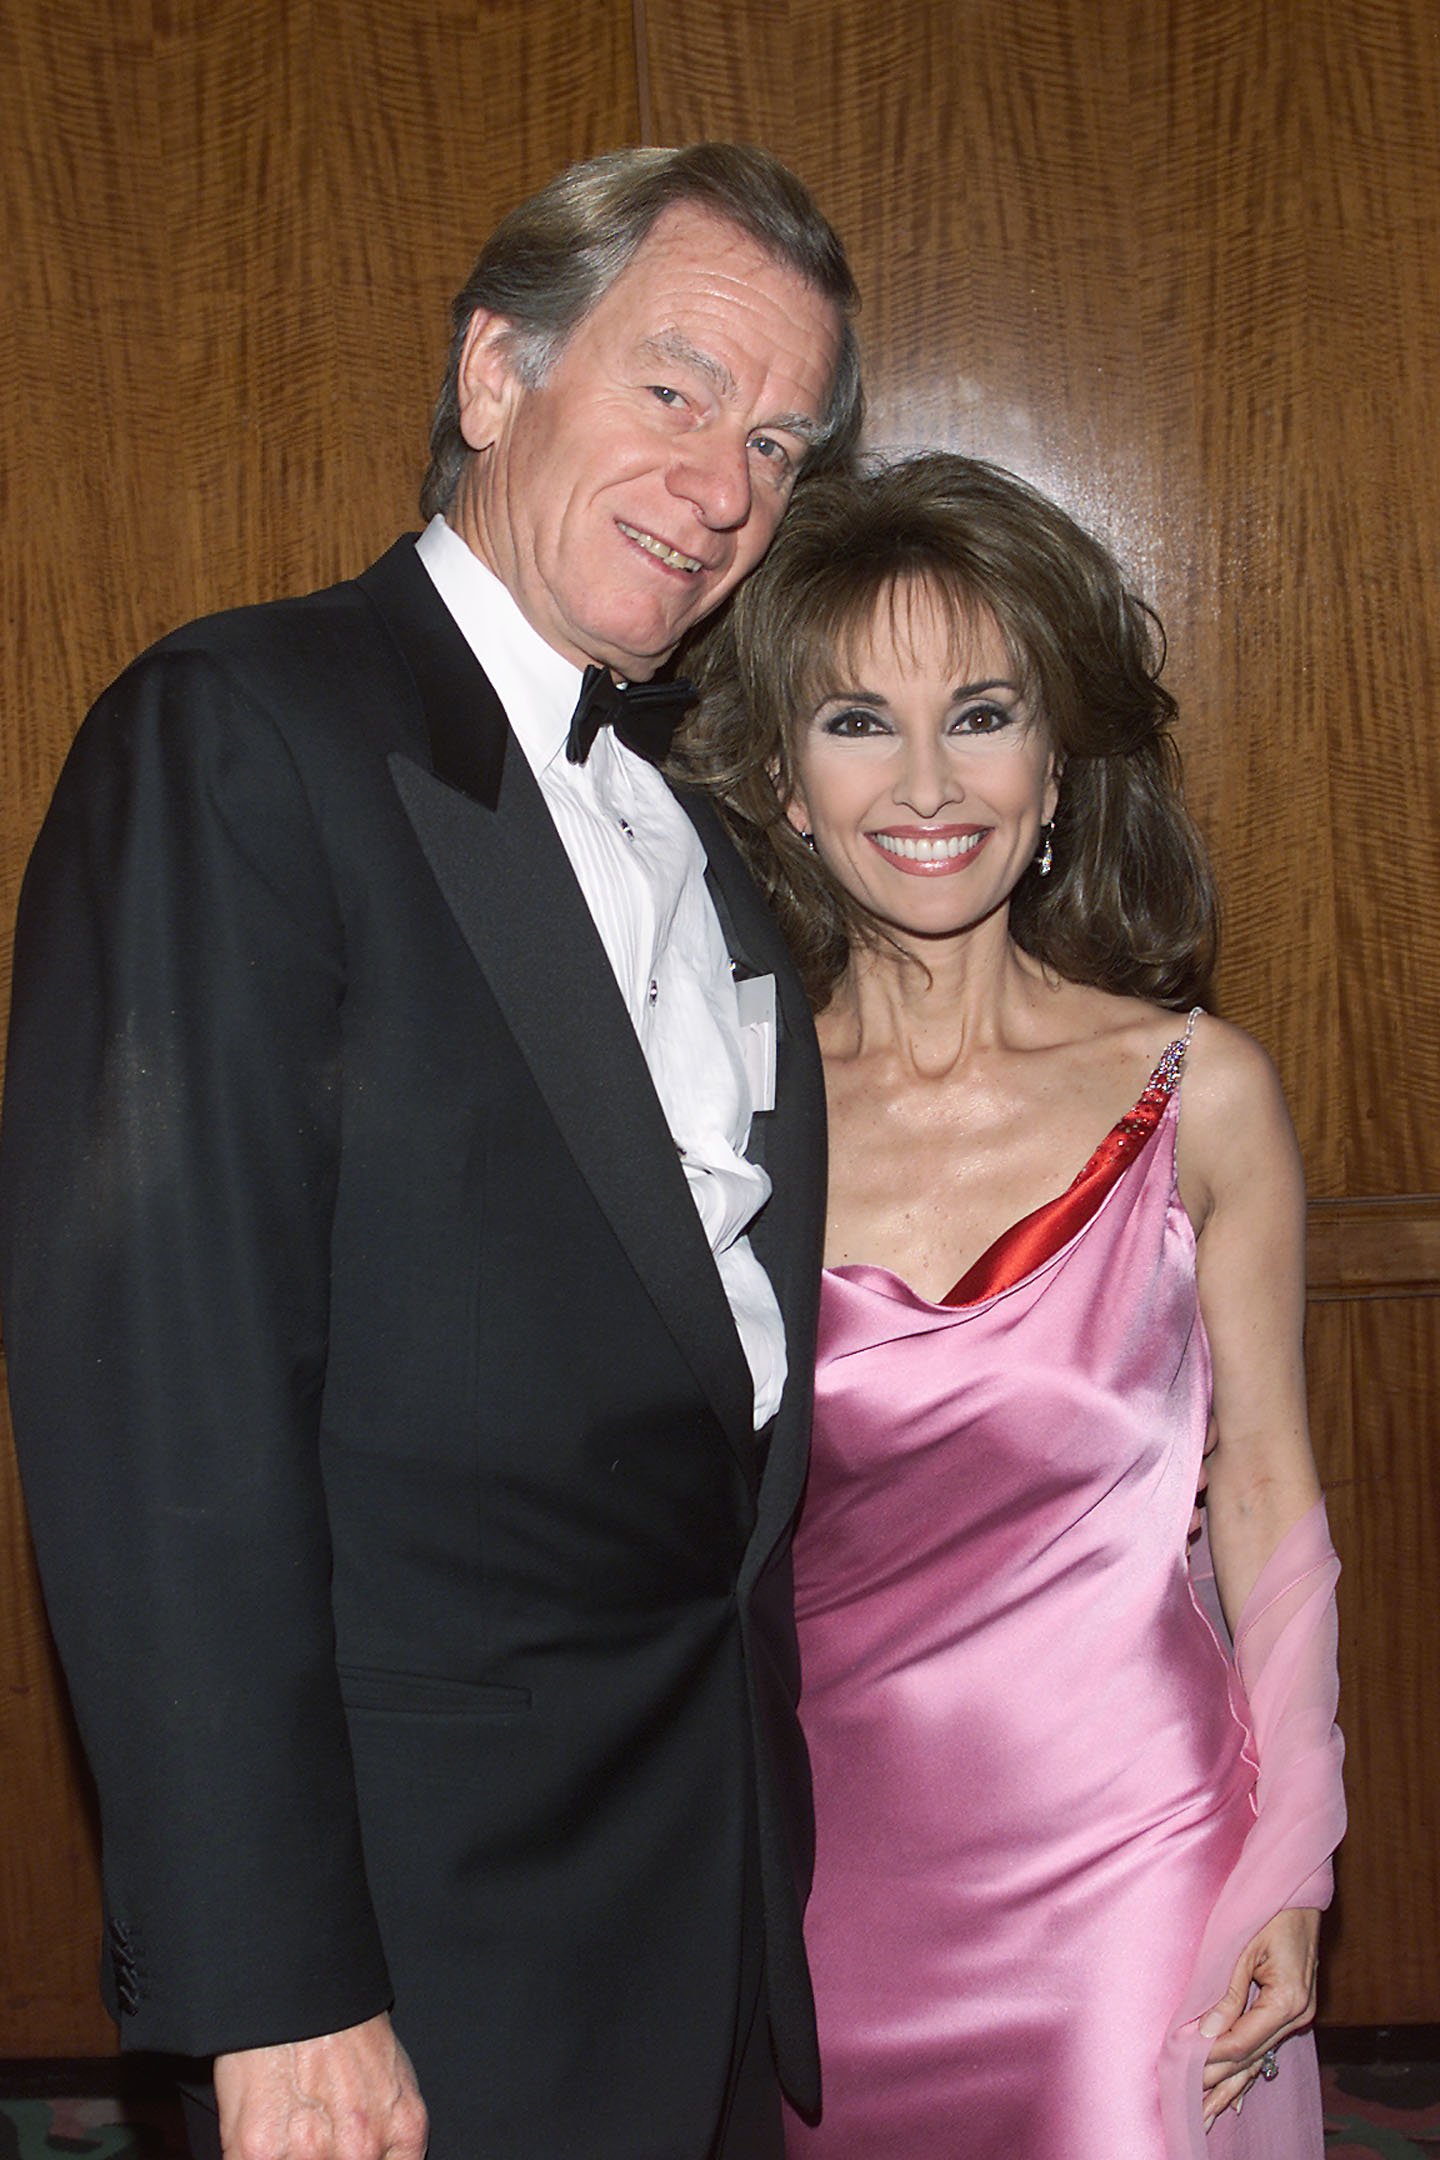 Susan Lucci and Helmut Huber at The Michael Awards fashion gala in New York City on November 27, 2000. | Source: Evan Agostini/ImageDirect/Getty Images